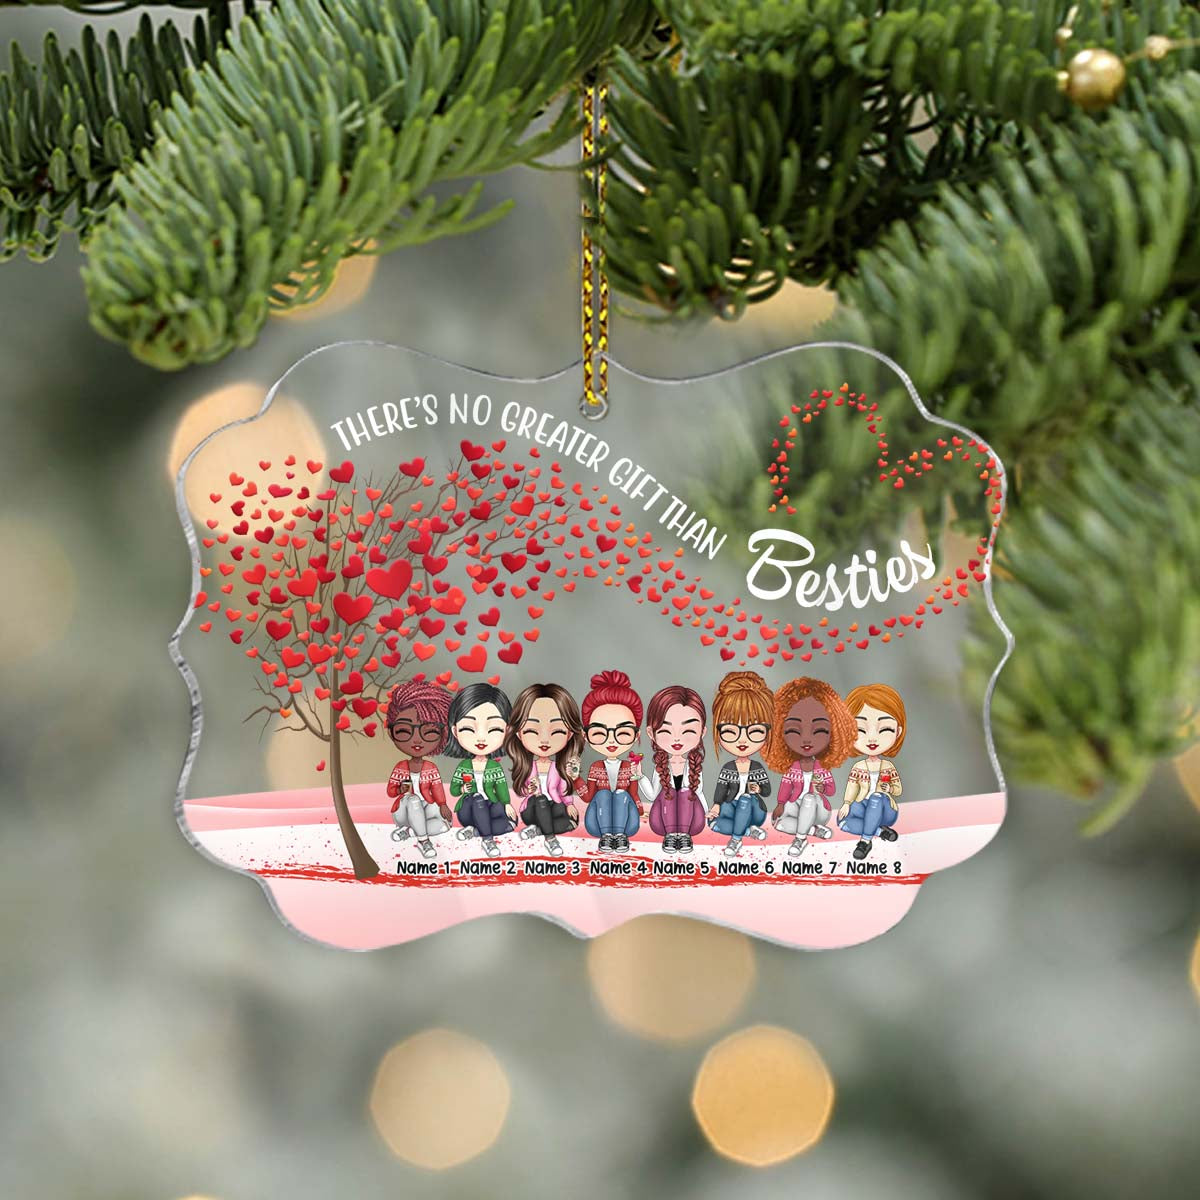 There's No Greater Gift Than Besties Personalized Custom Name Acrylic Ornaments - Christmas Gift